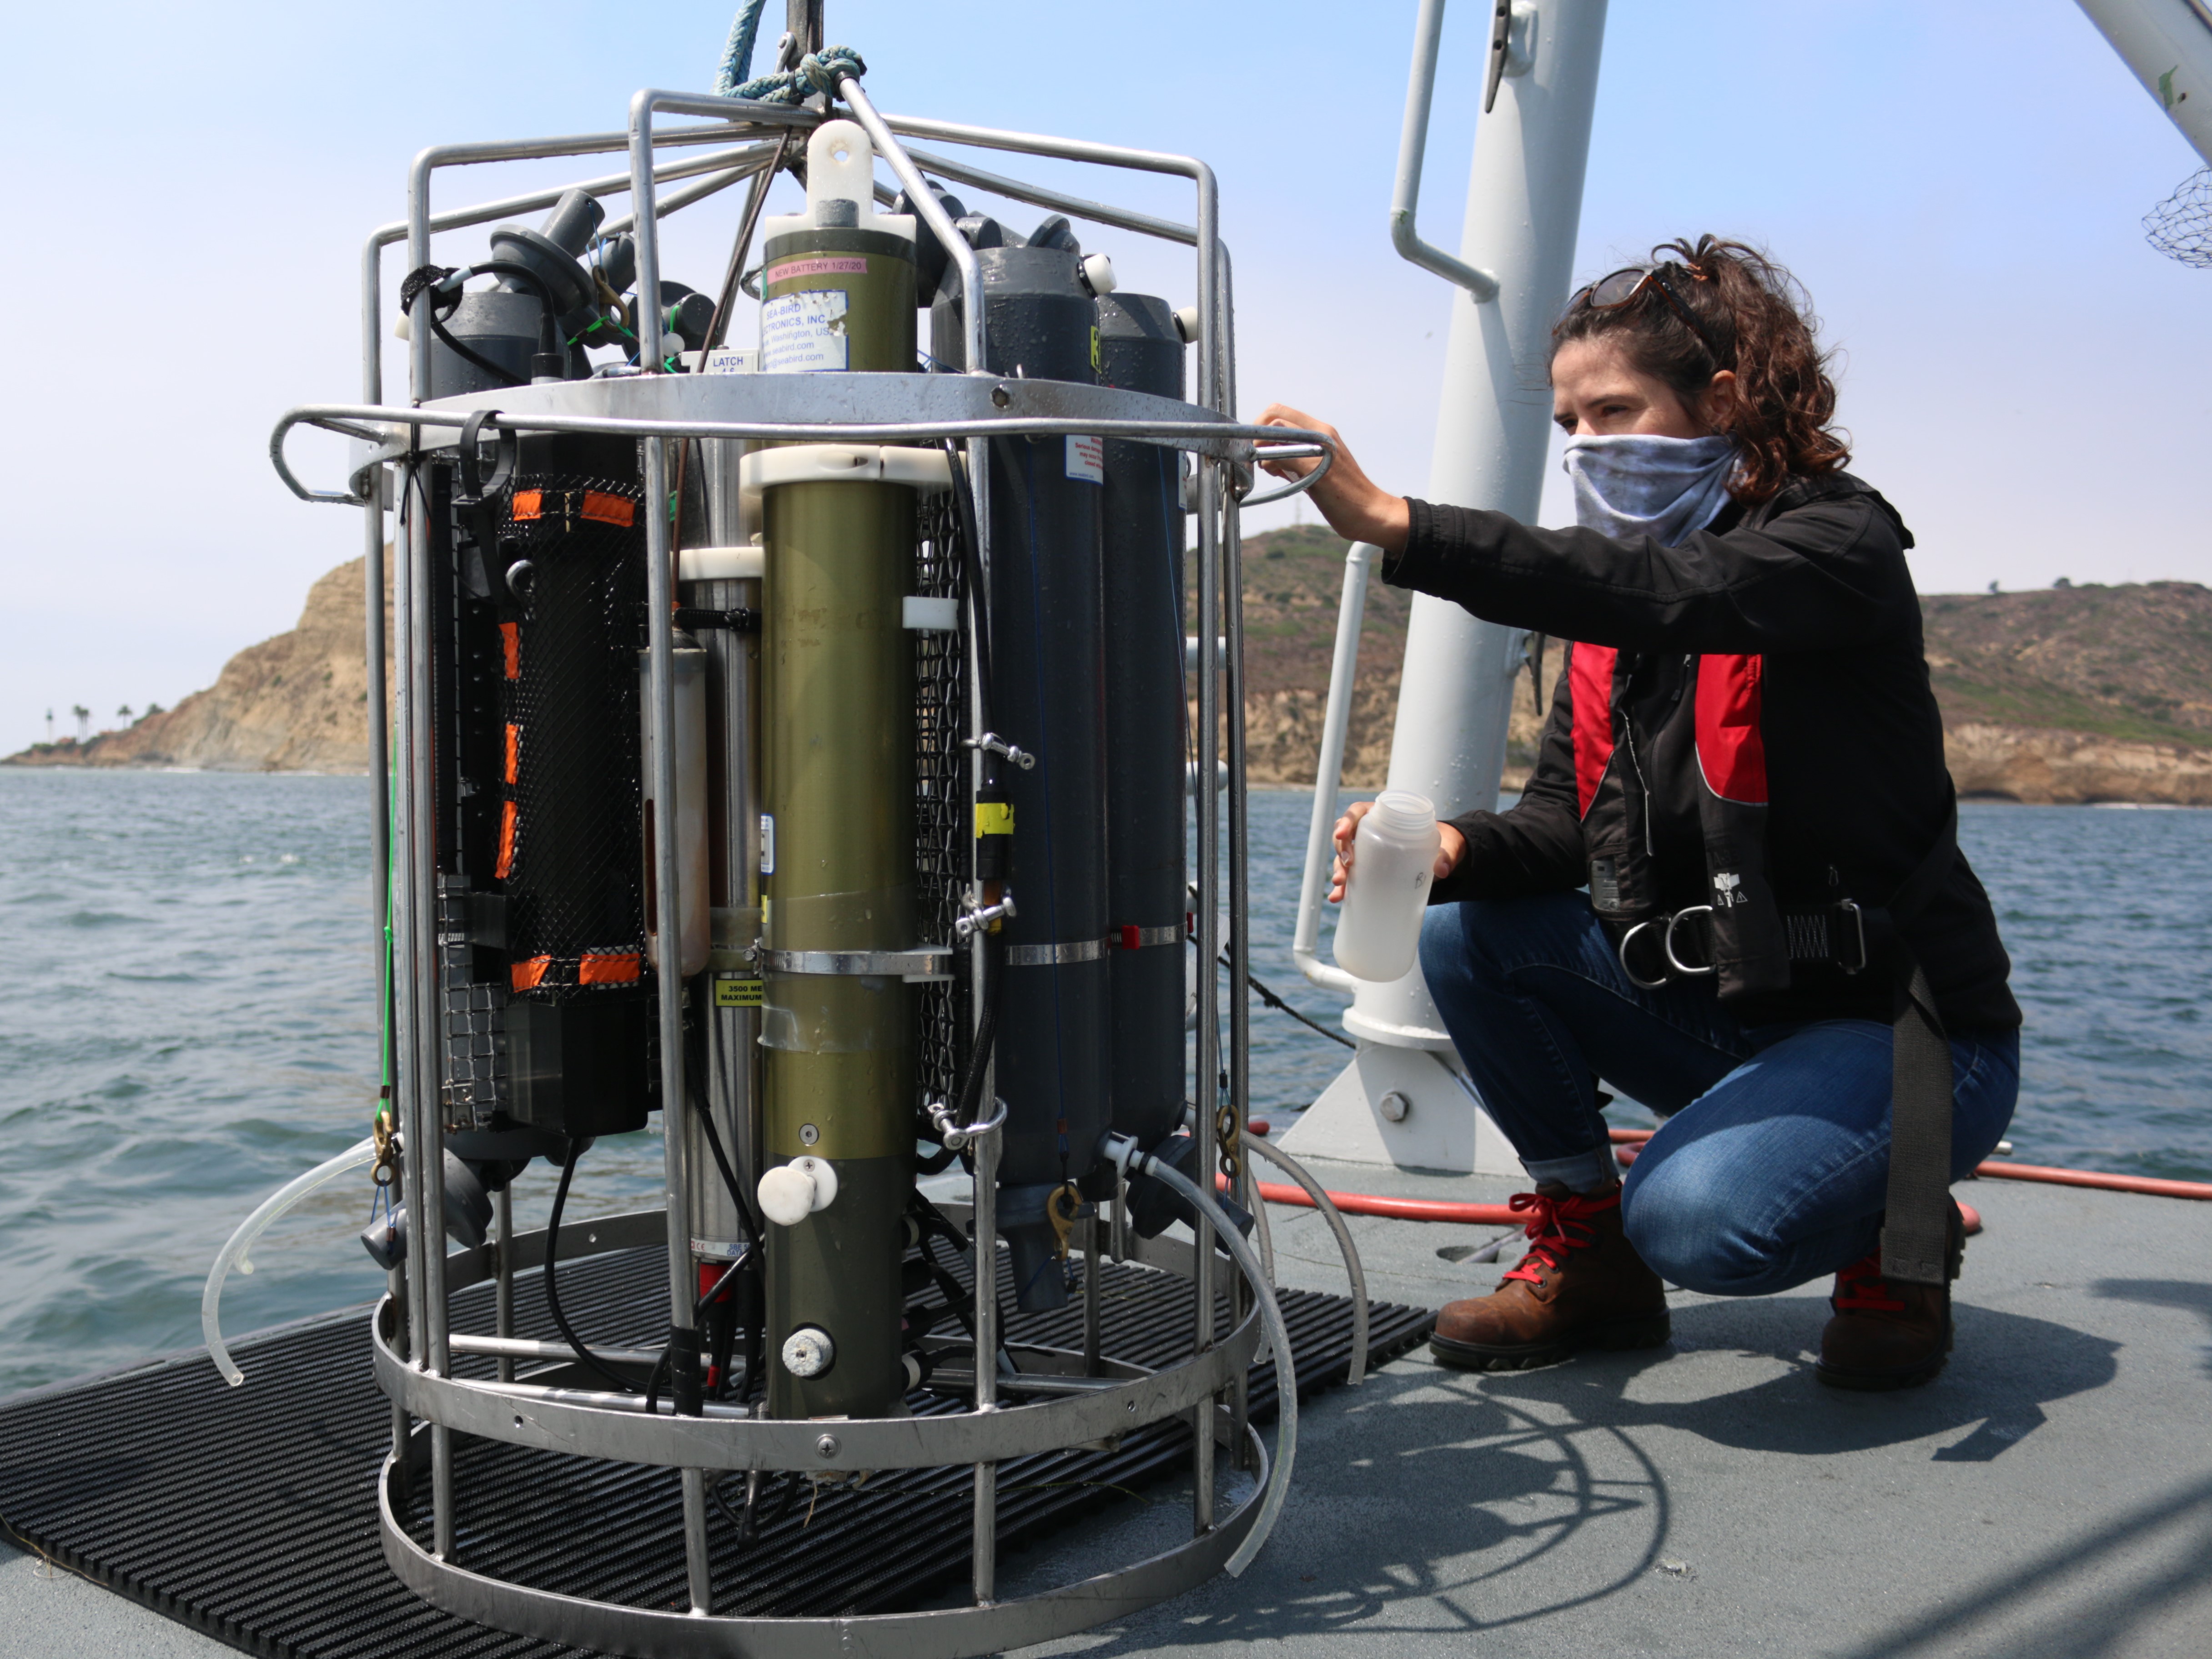 A marine biologist collects a water sample from the conductivity temperature depth profiler, also known as a CTD.